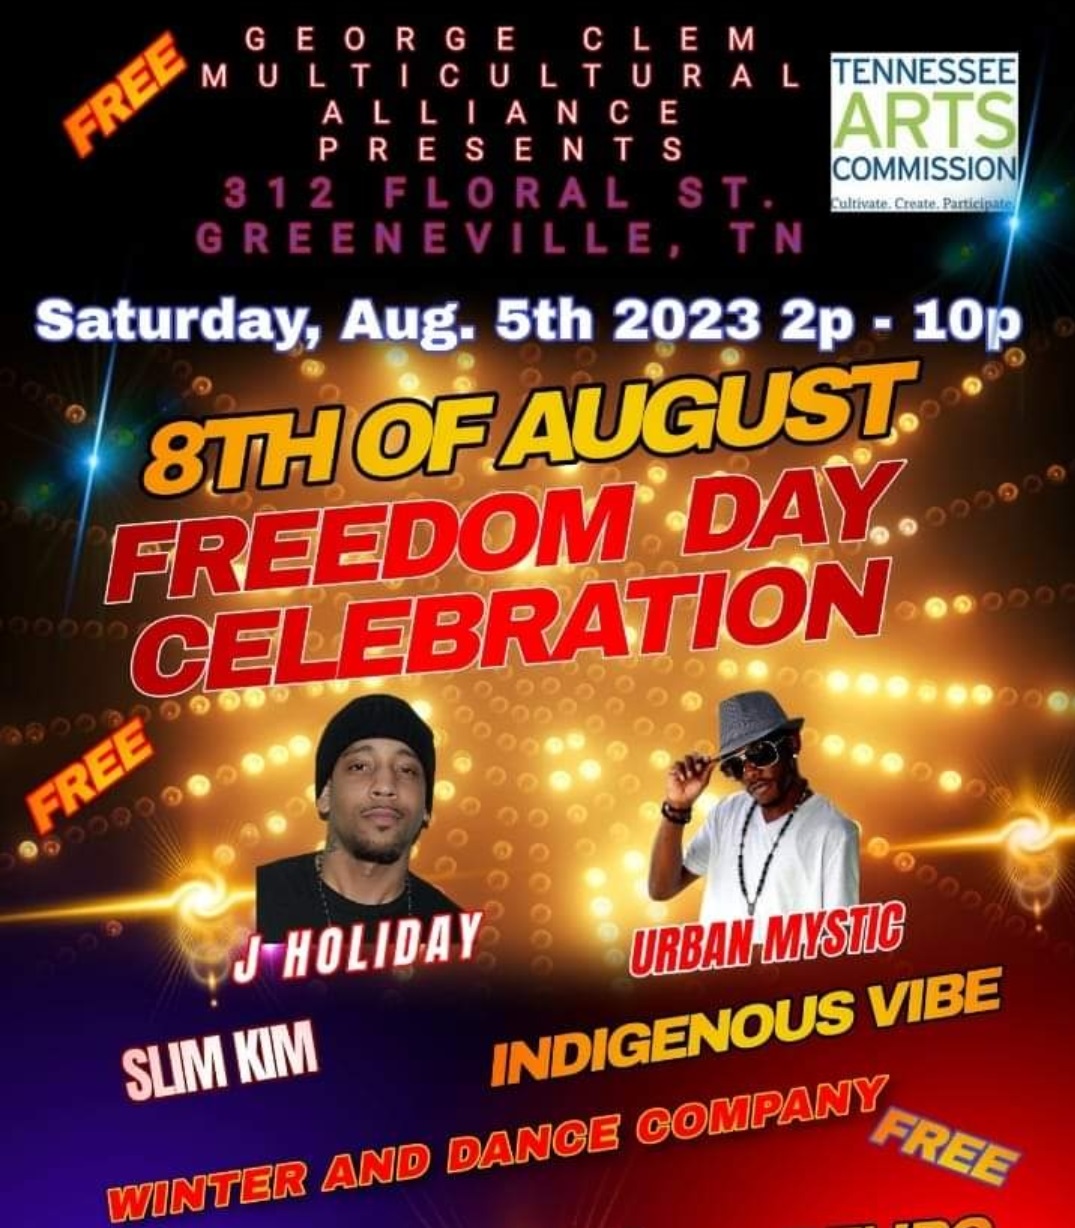 8th of August Freedom Day Celebration at George Clem